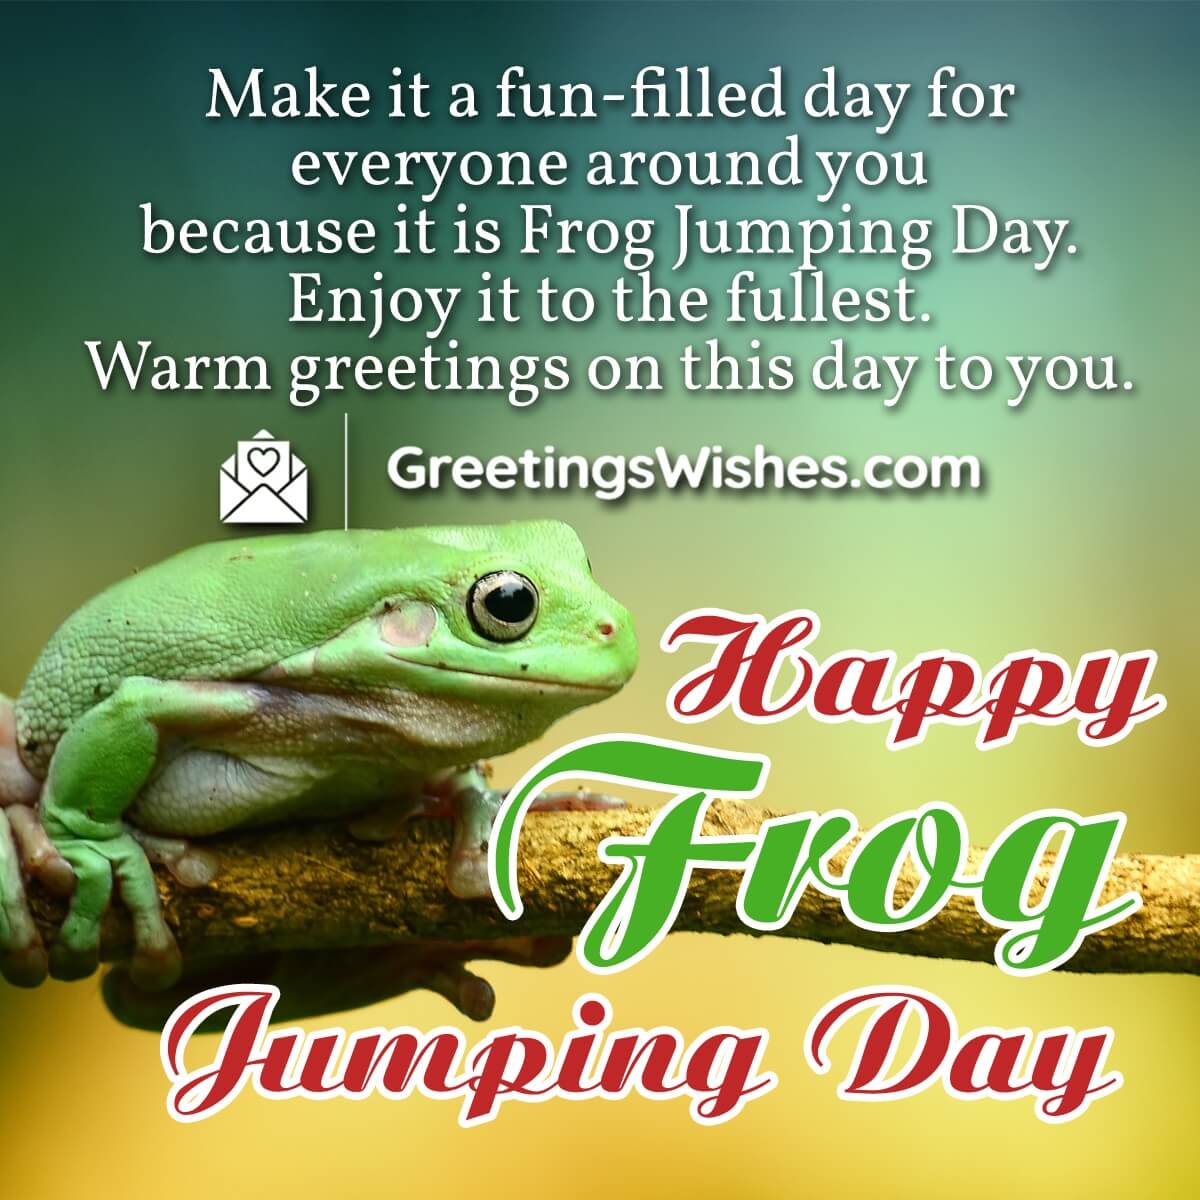 Frog Jumping Day Greetings